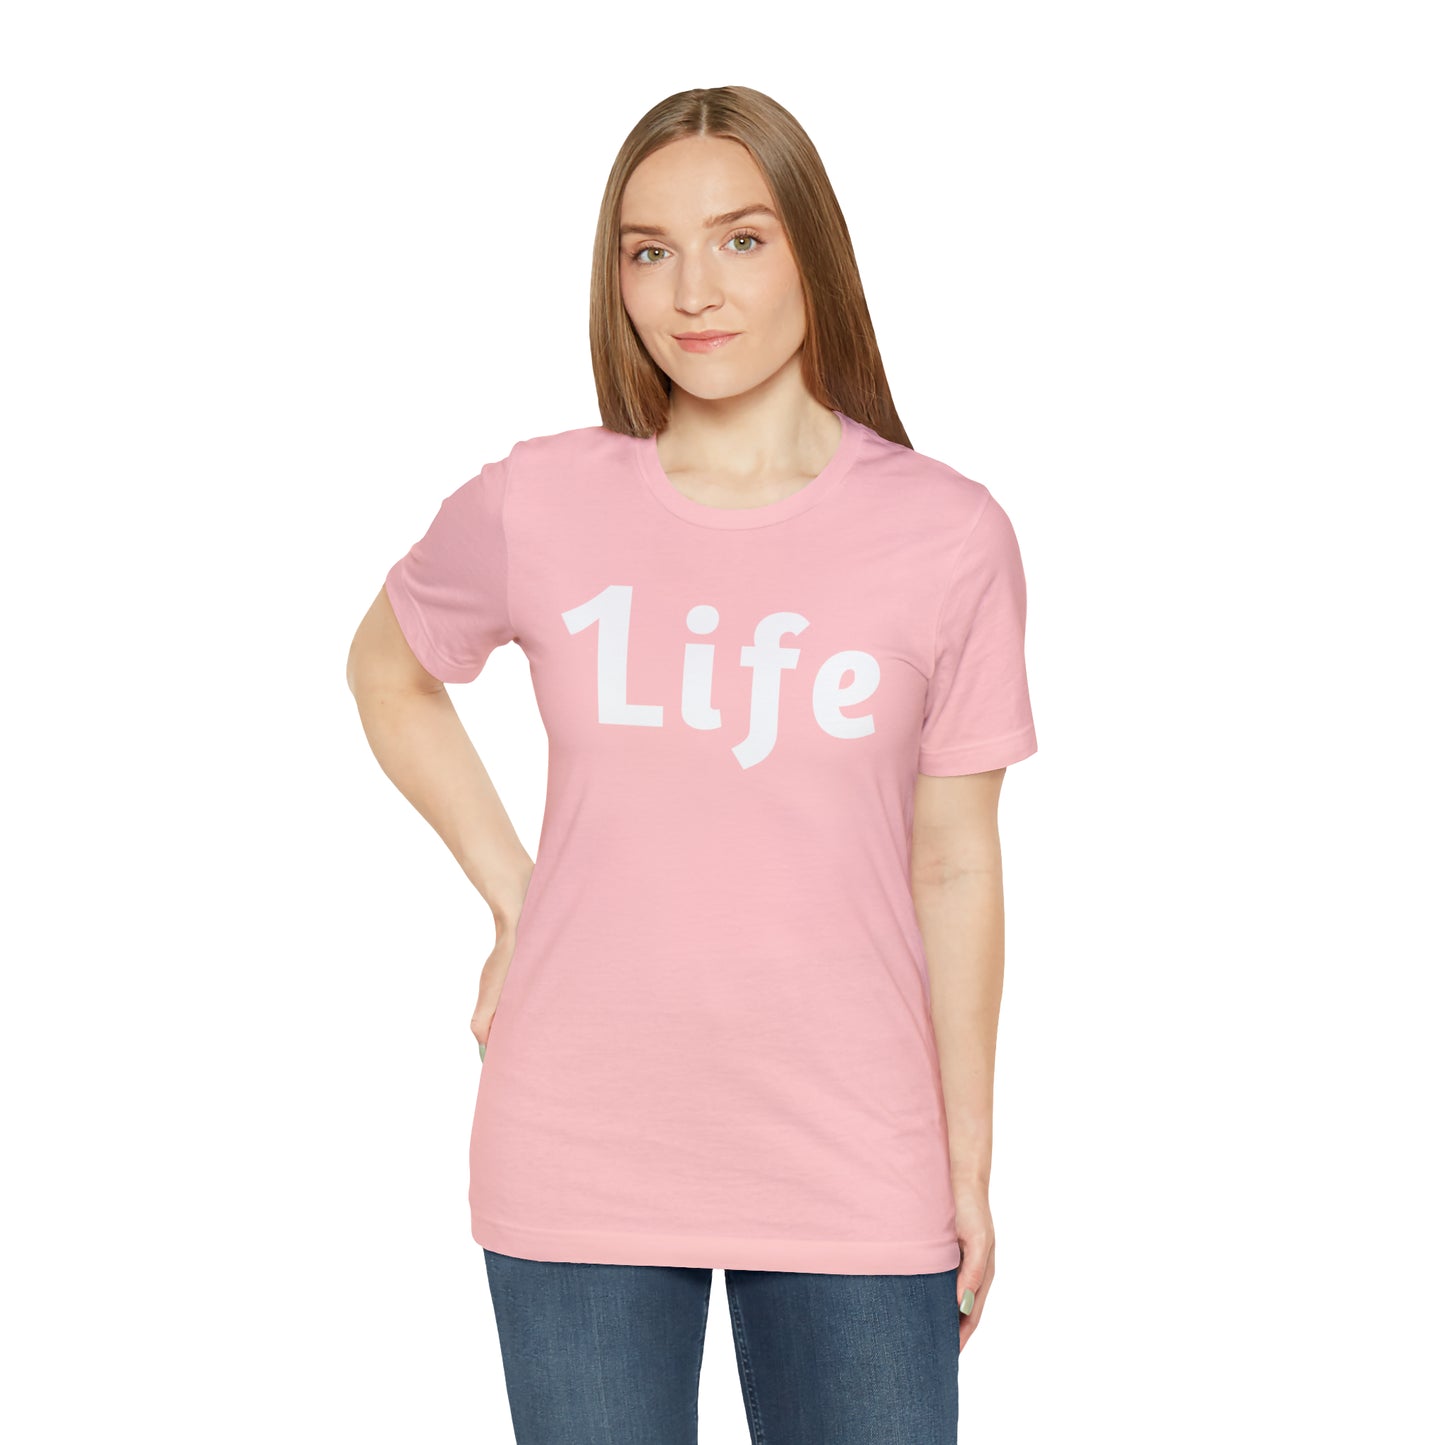 One life Shirt 1life shirt Live Your Life You Only Have One Life To Live